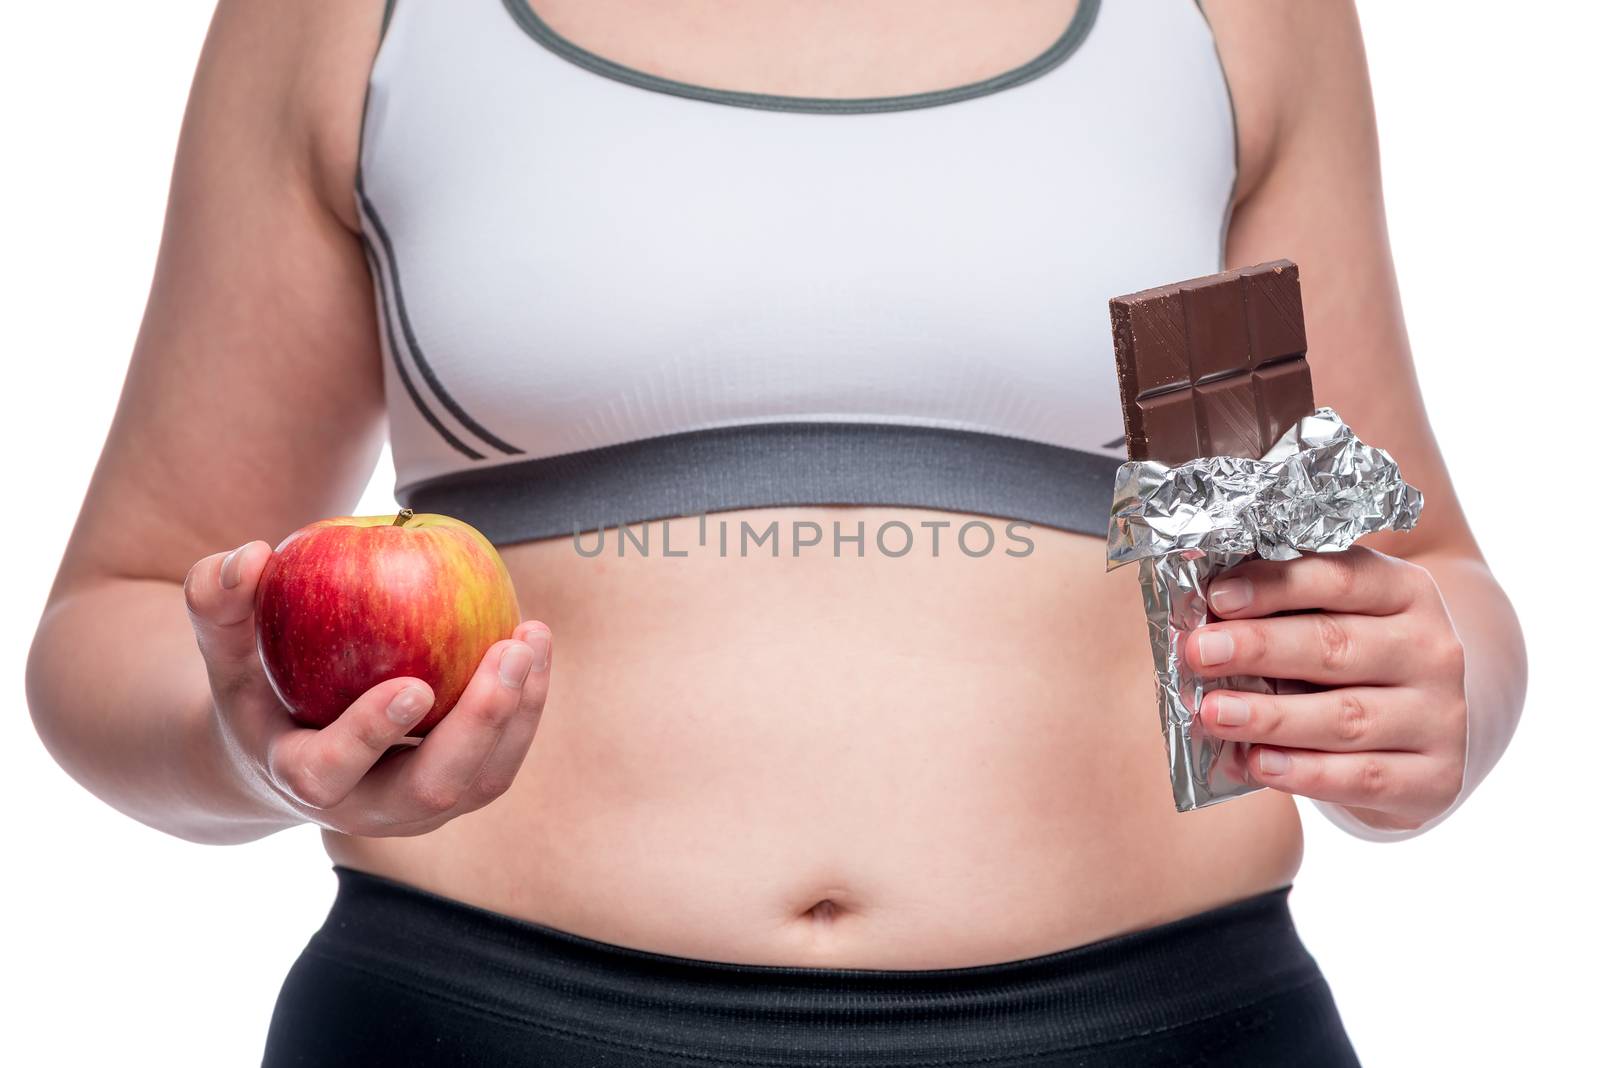 Fat woman makes a difficult choice between an apple and chocolate, in the frame a close-up belly